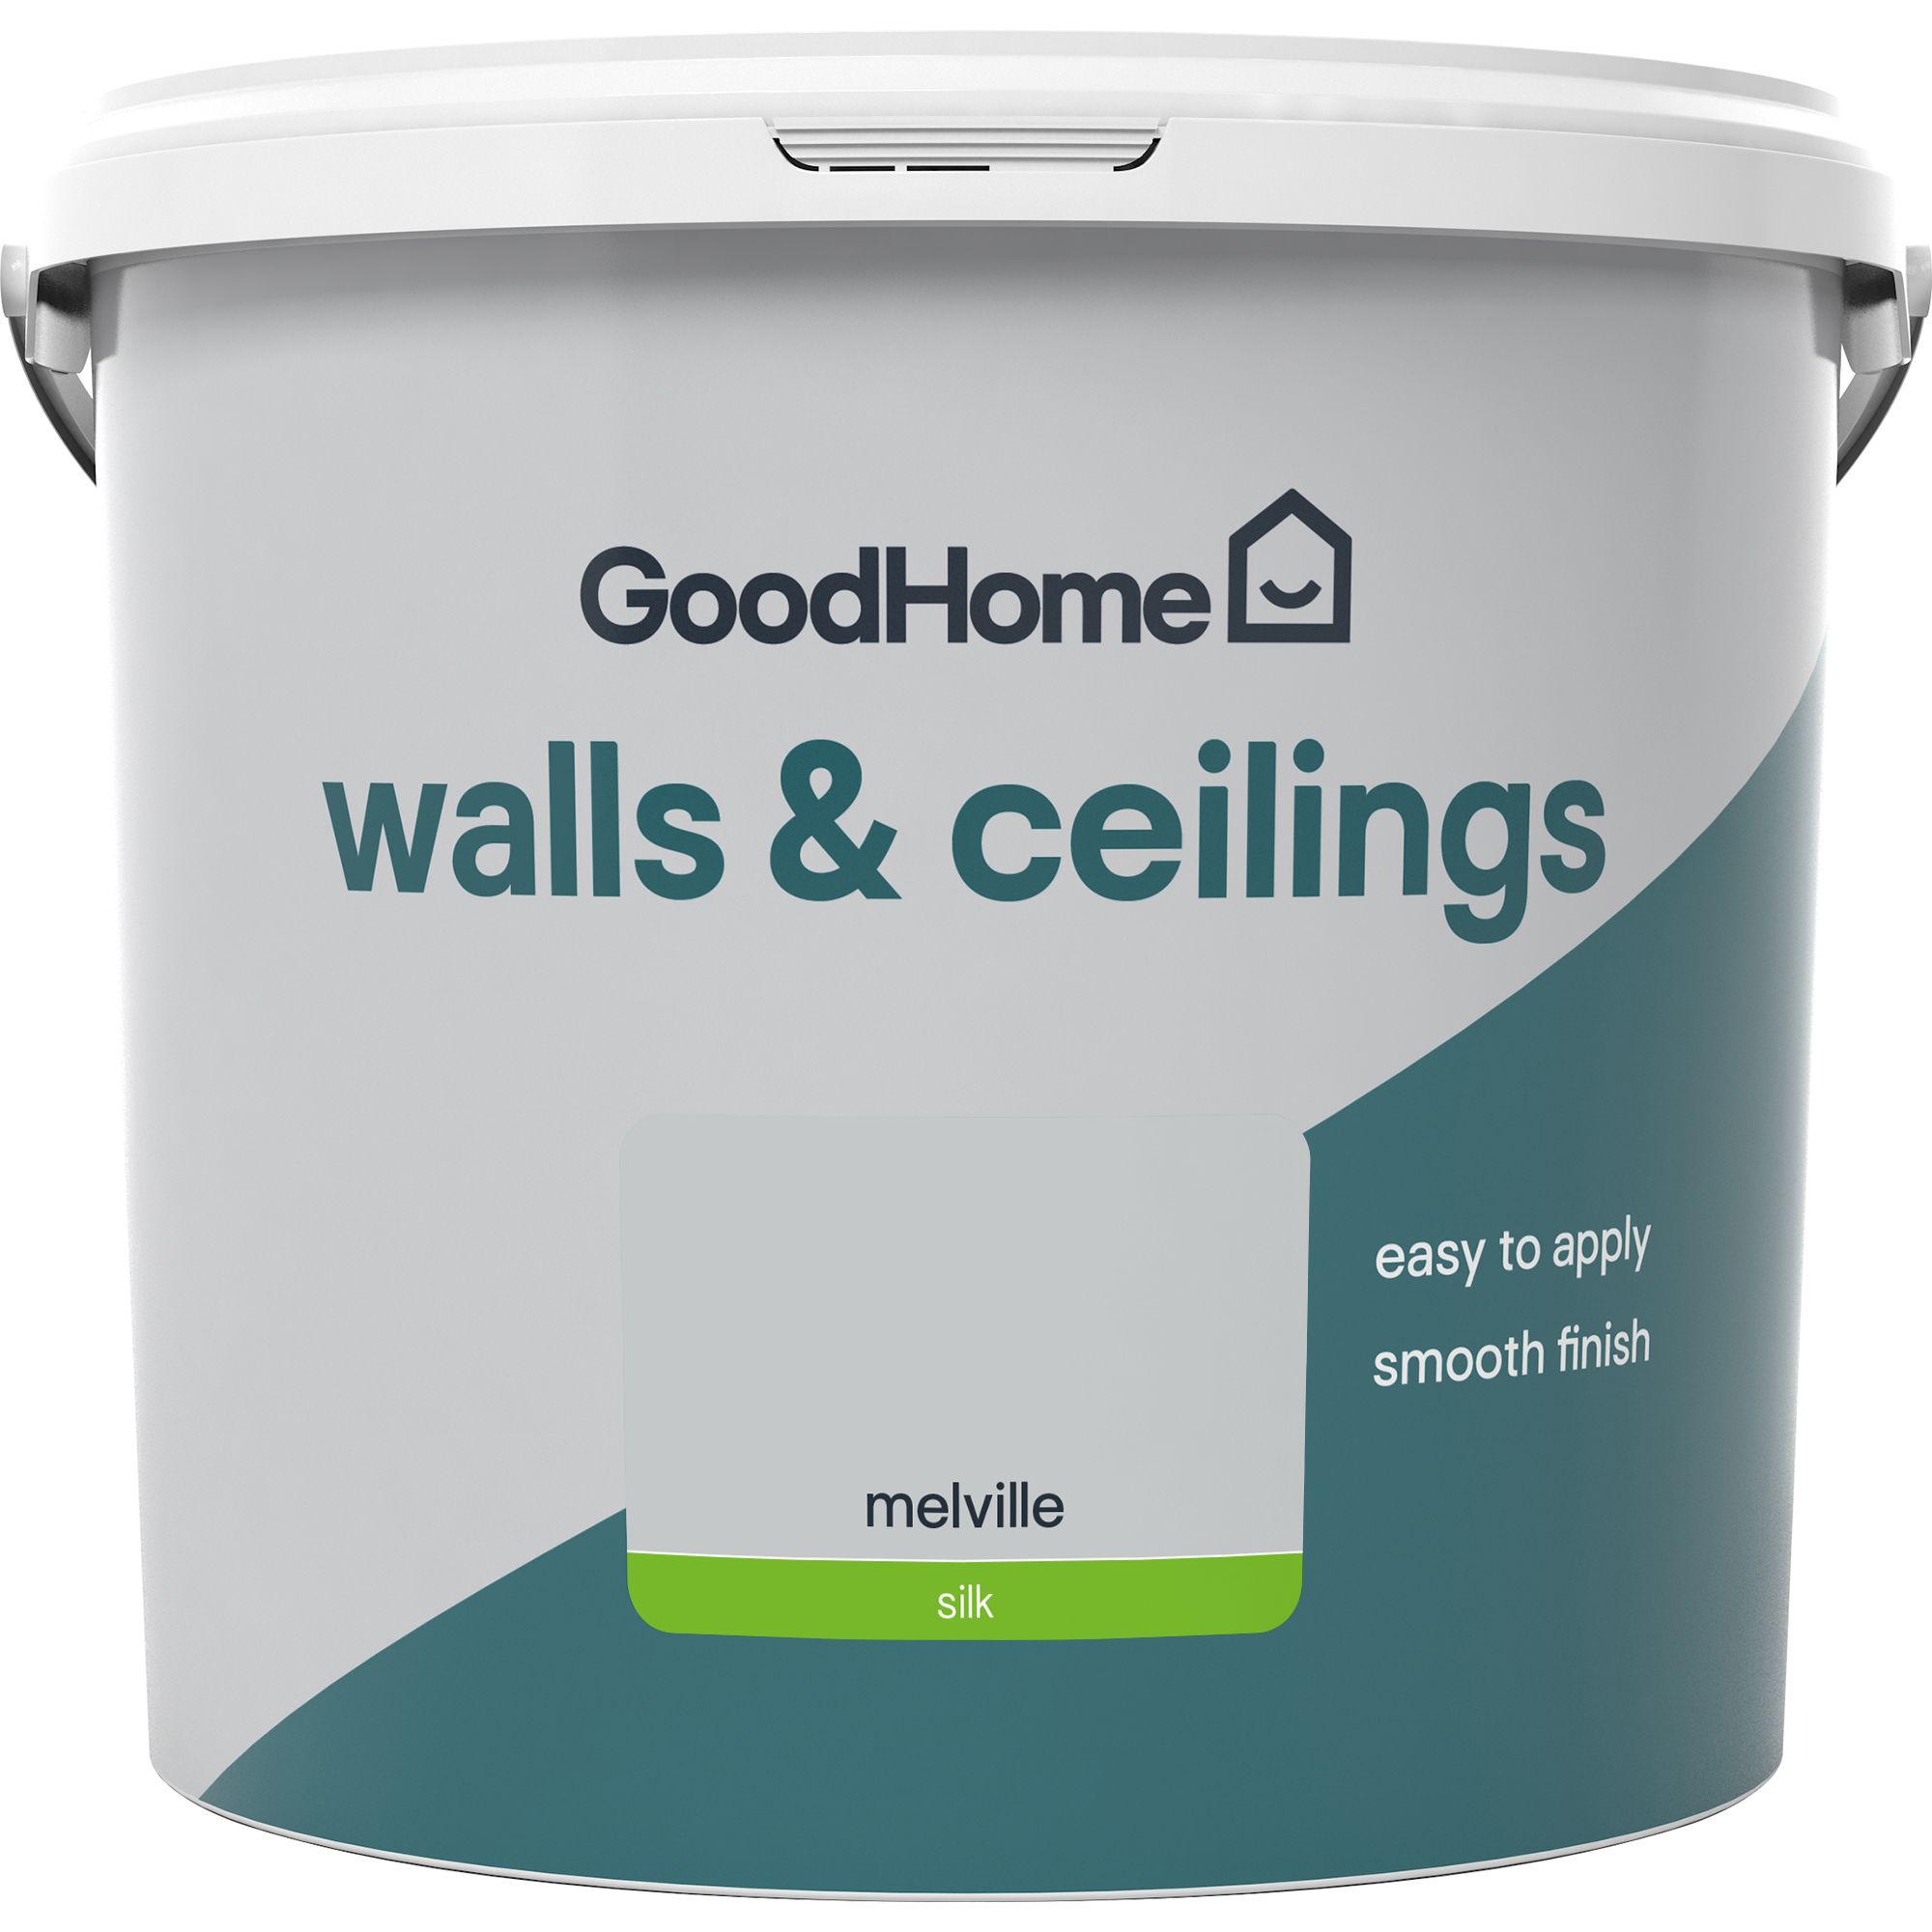 GoodHome Walls & ceilings Melville Silk Emulsion paint, 5L